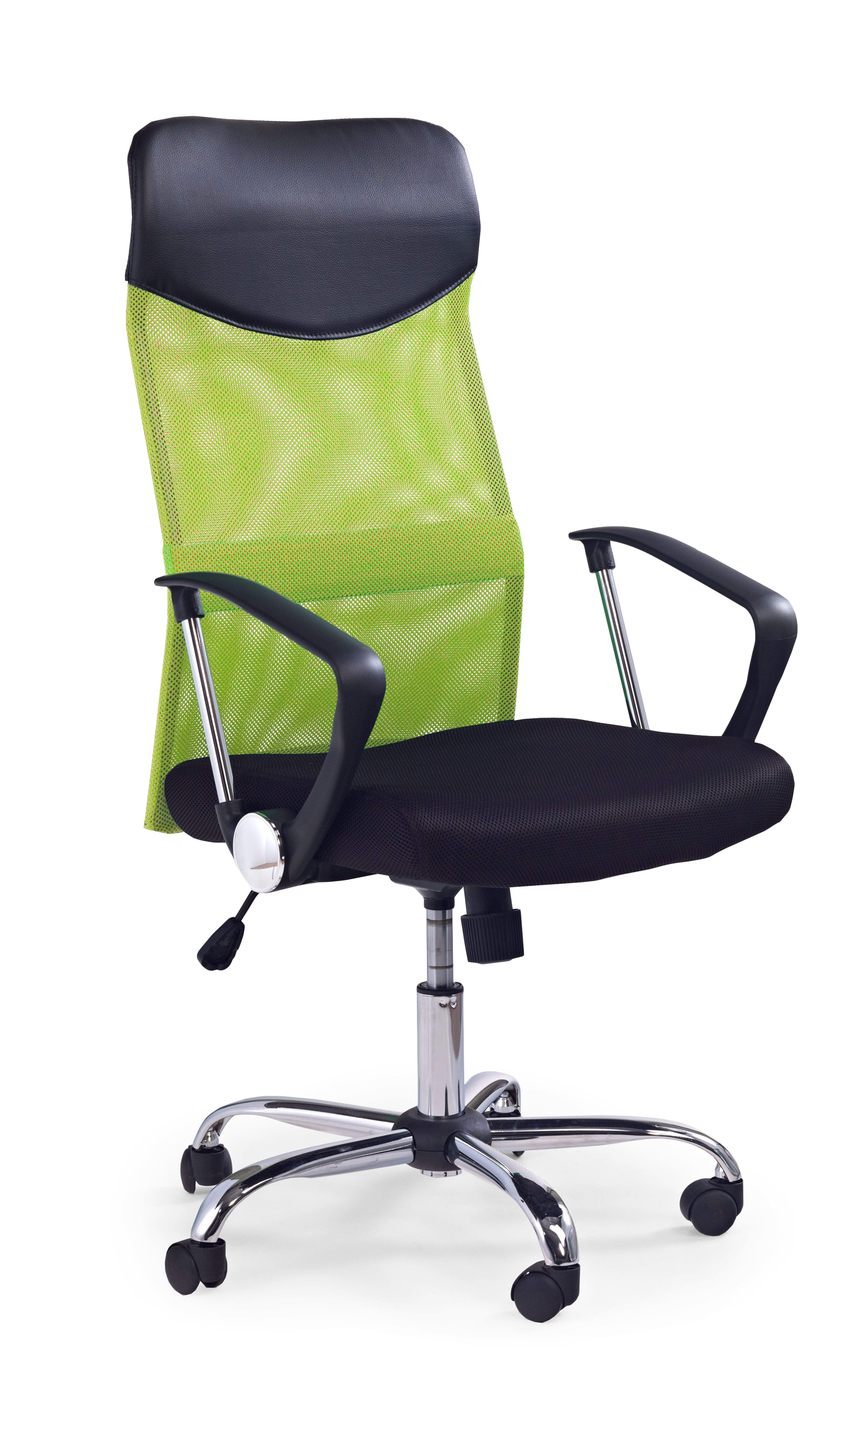 VIRE chair color: green